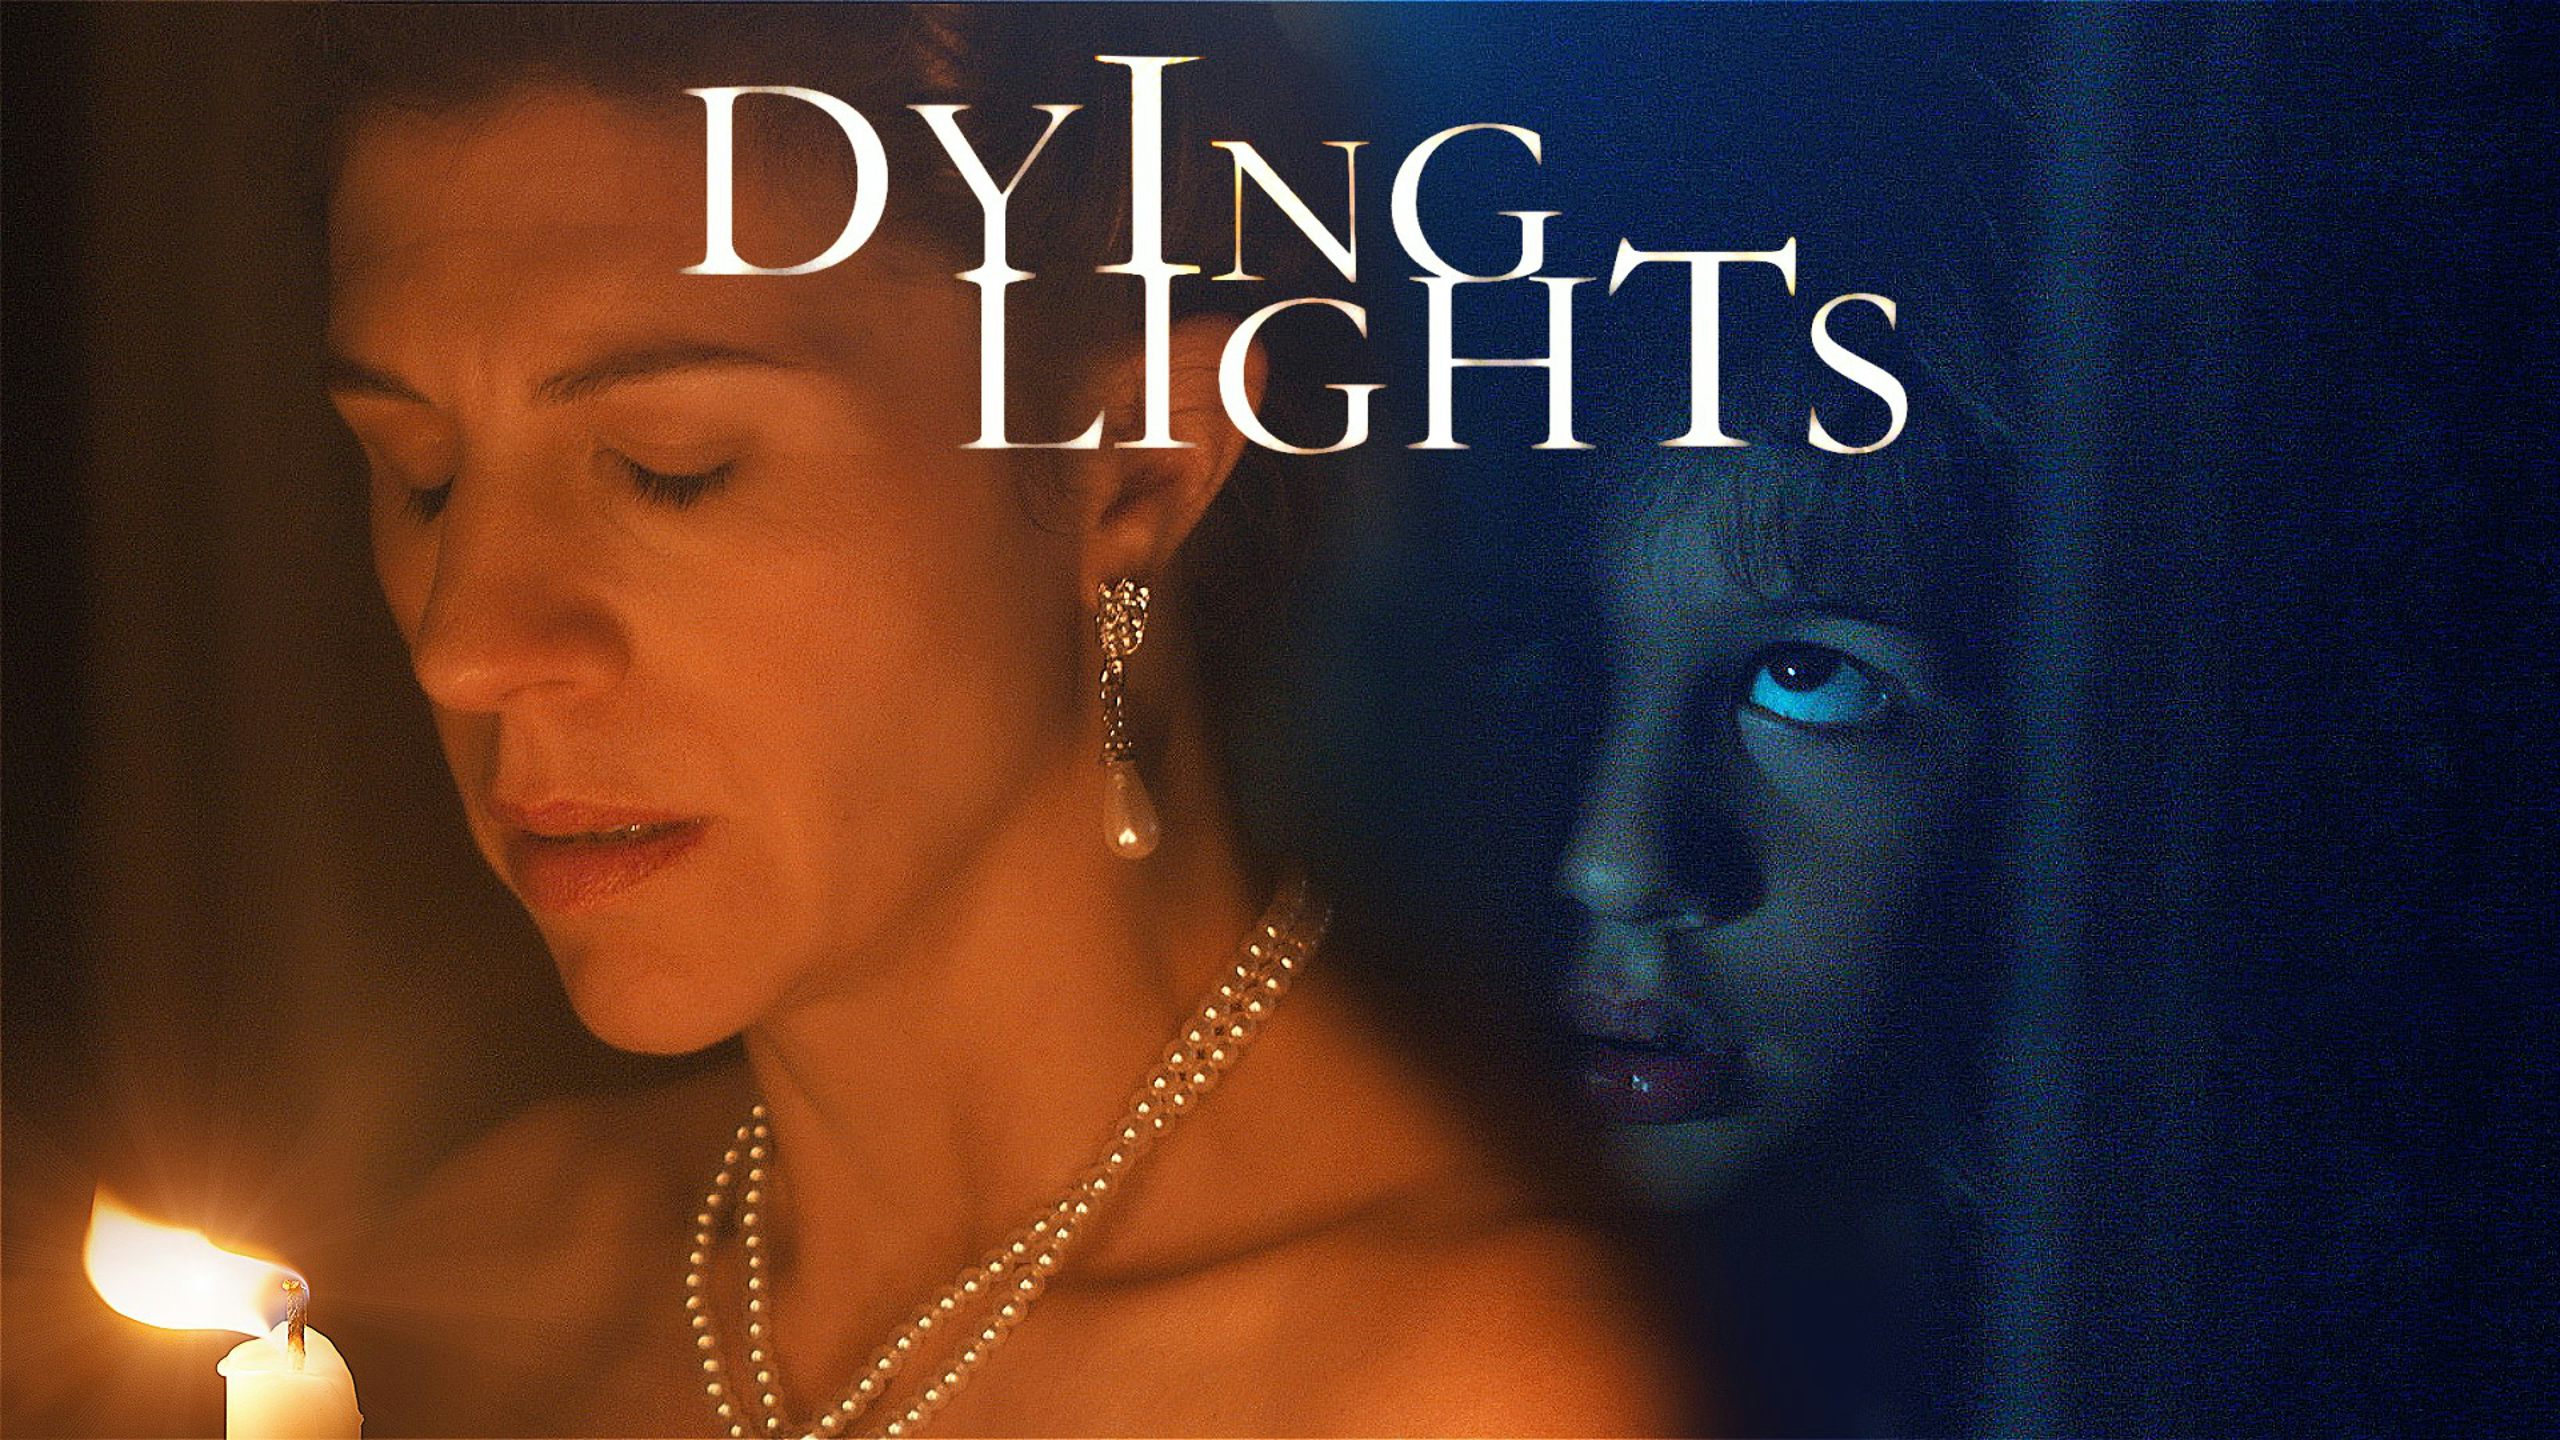 Dying LIghts